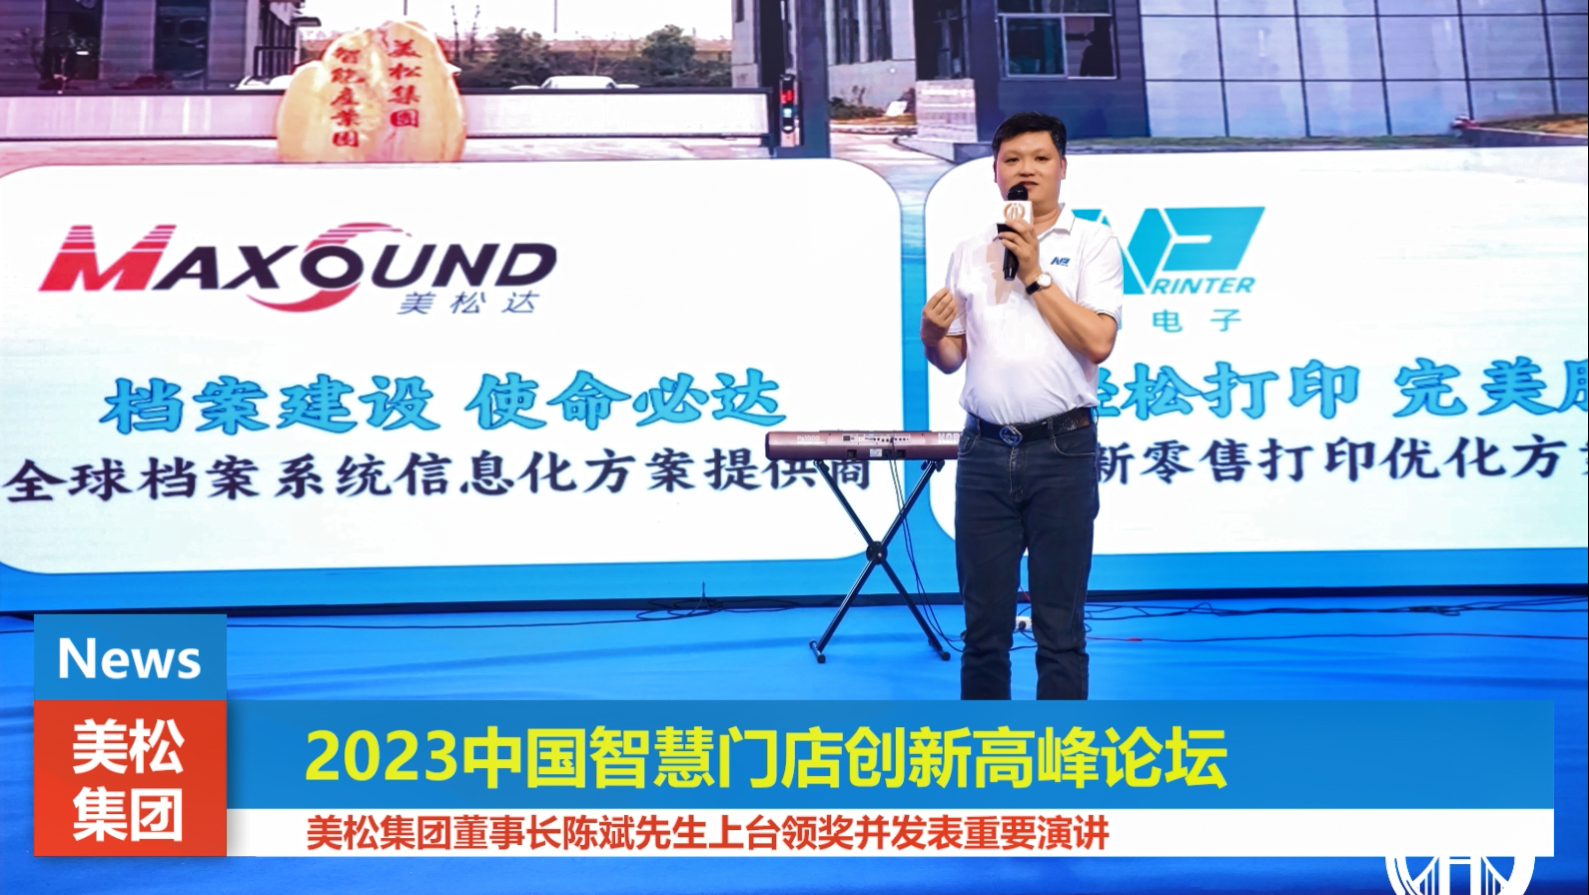 Chairman of MASUNG Group spoke at the 2023 China Smart Store Innovation Summit Forum